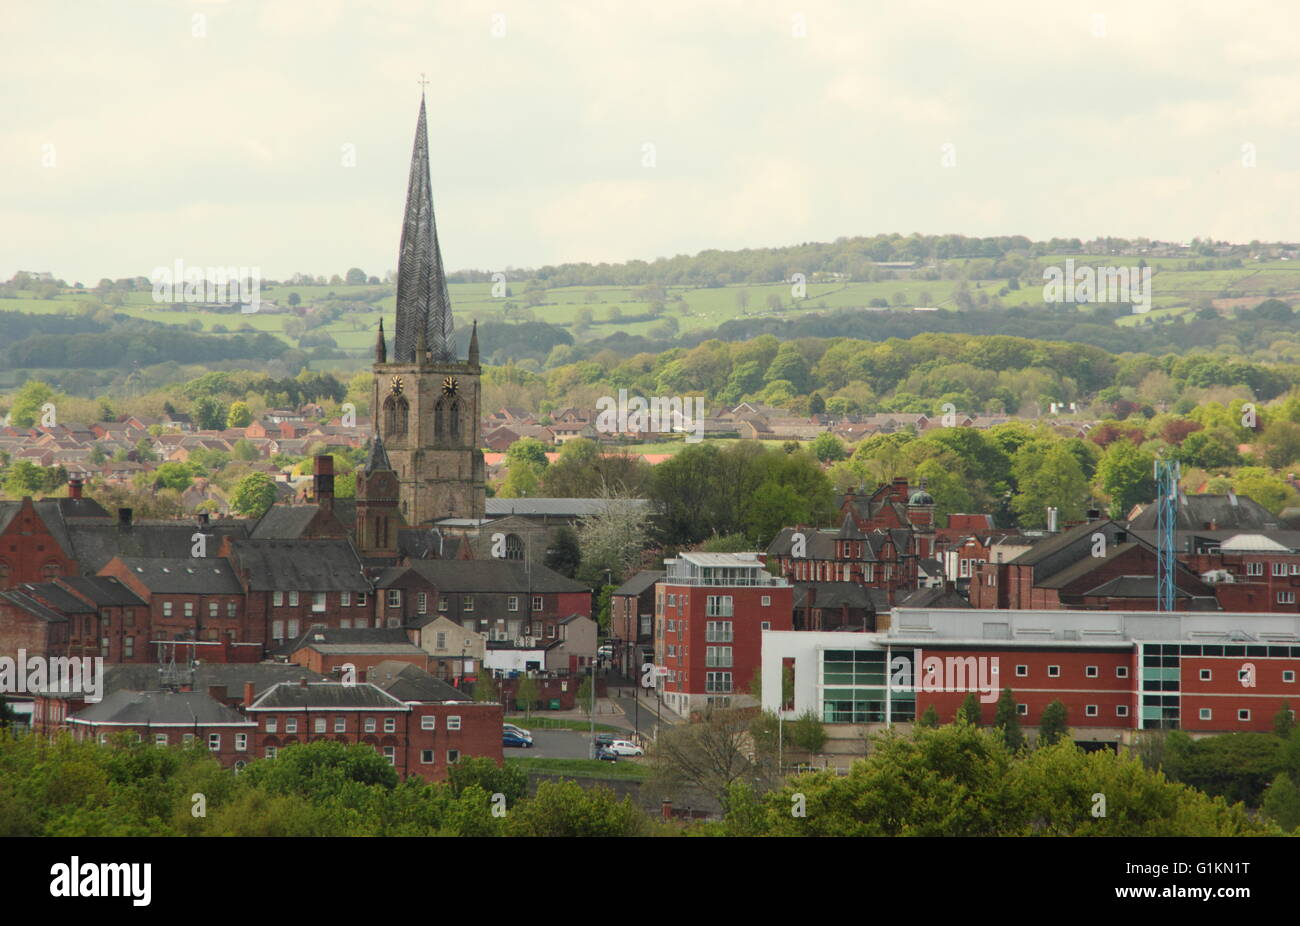 Skyline of Chesterfield town centre dominated by the 'twisted spire' of St Mary And All Saints, Chesterfield, Derbyshire England Stock Photo